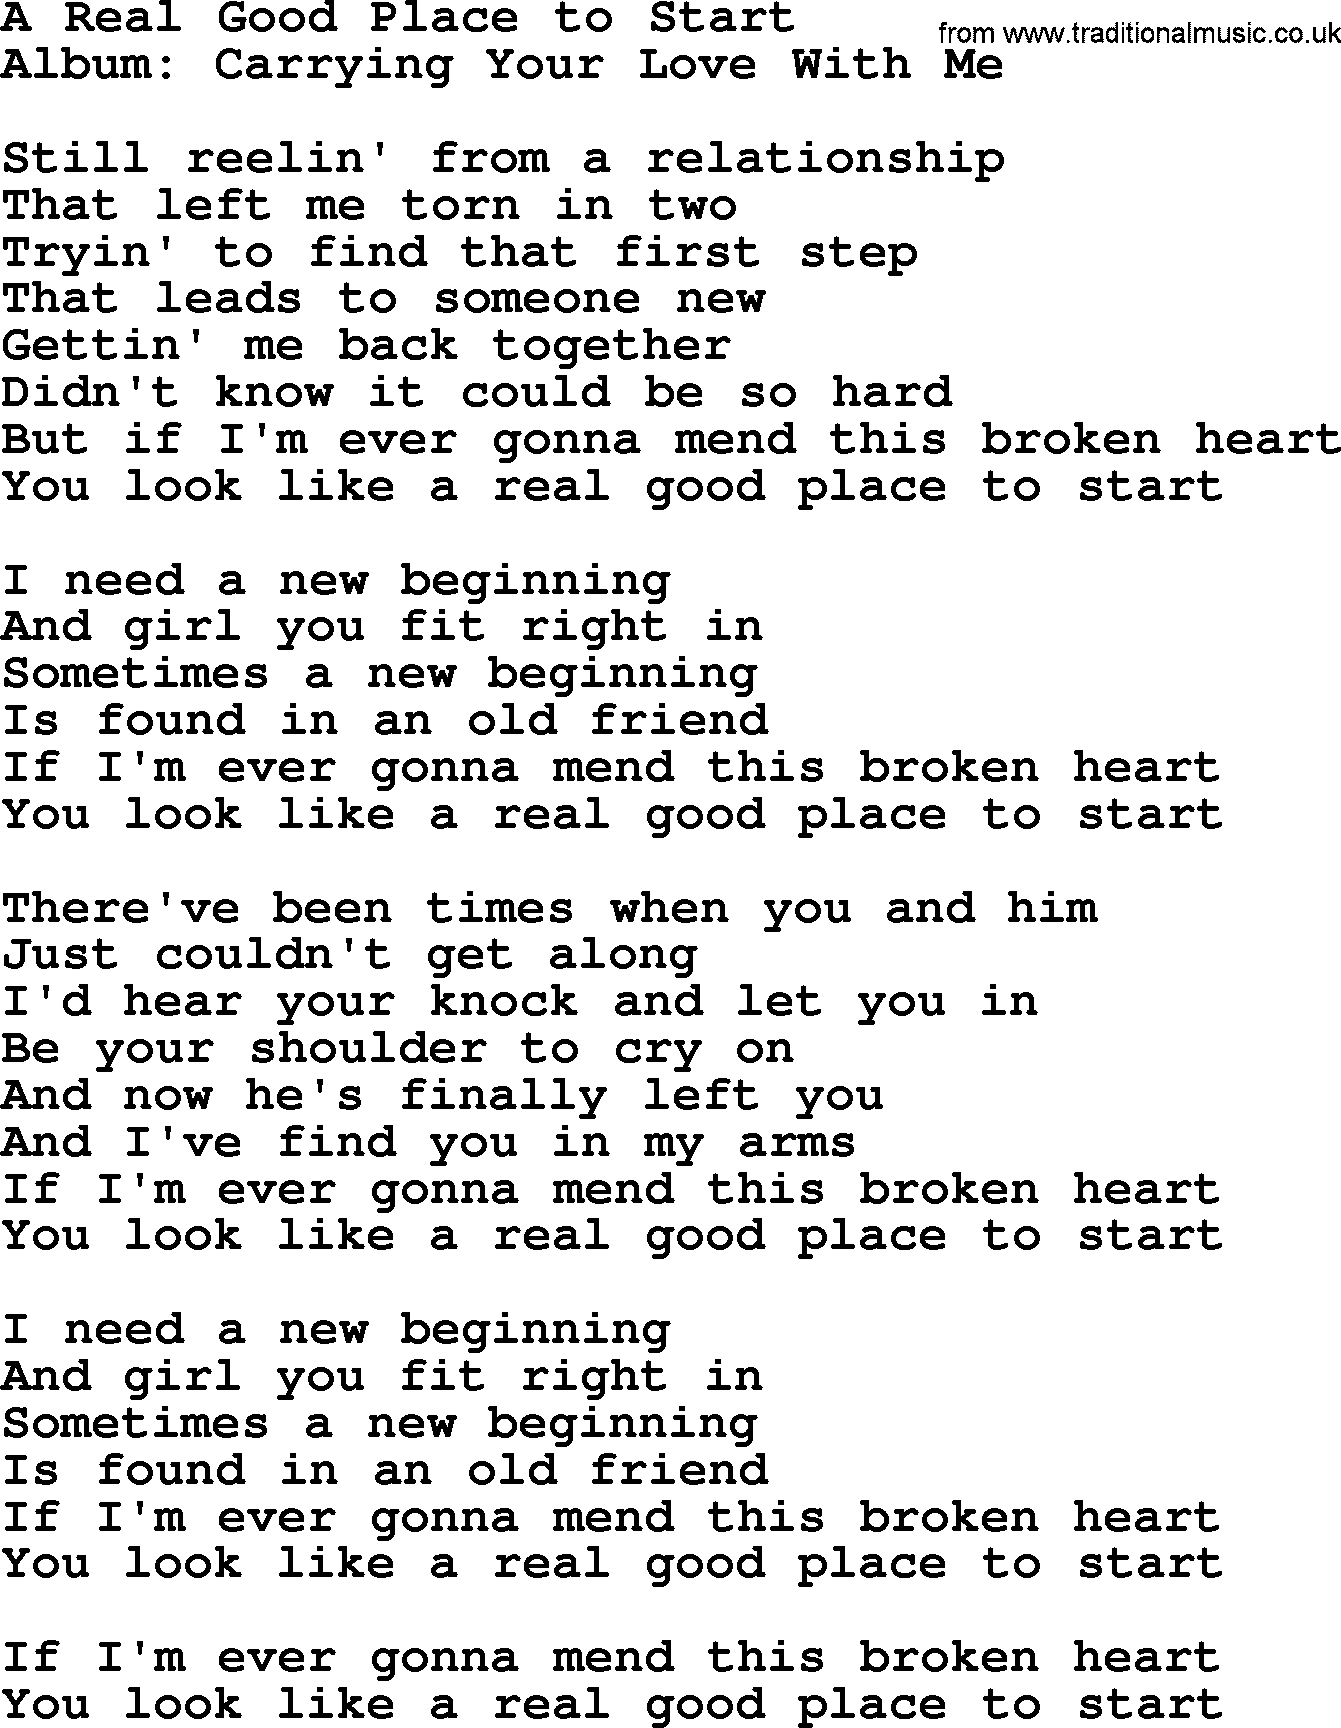 George Strait song: A Real Good Place to Start, lyrics